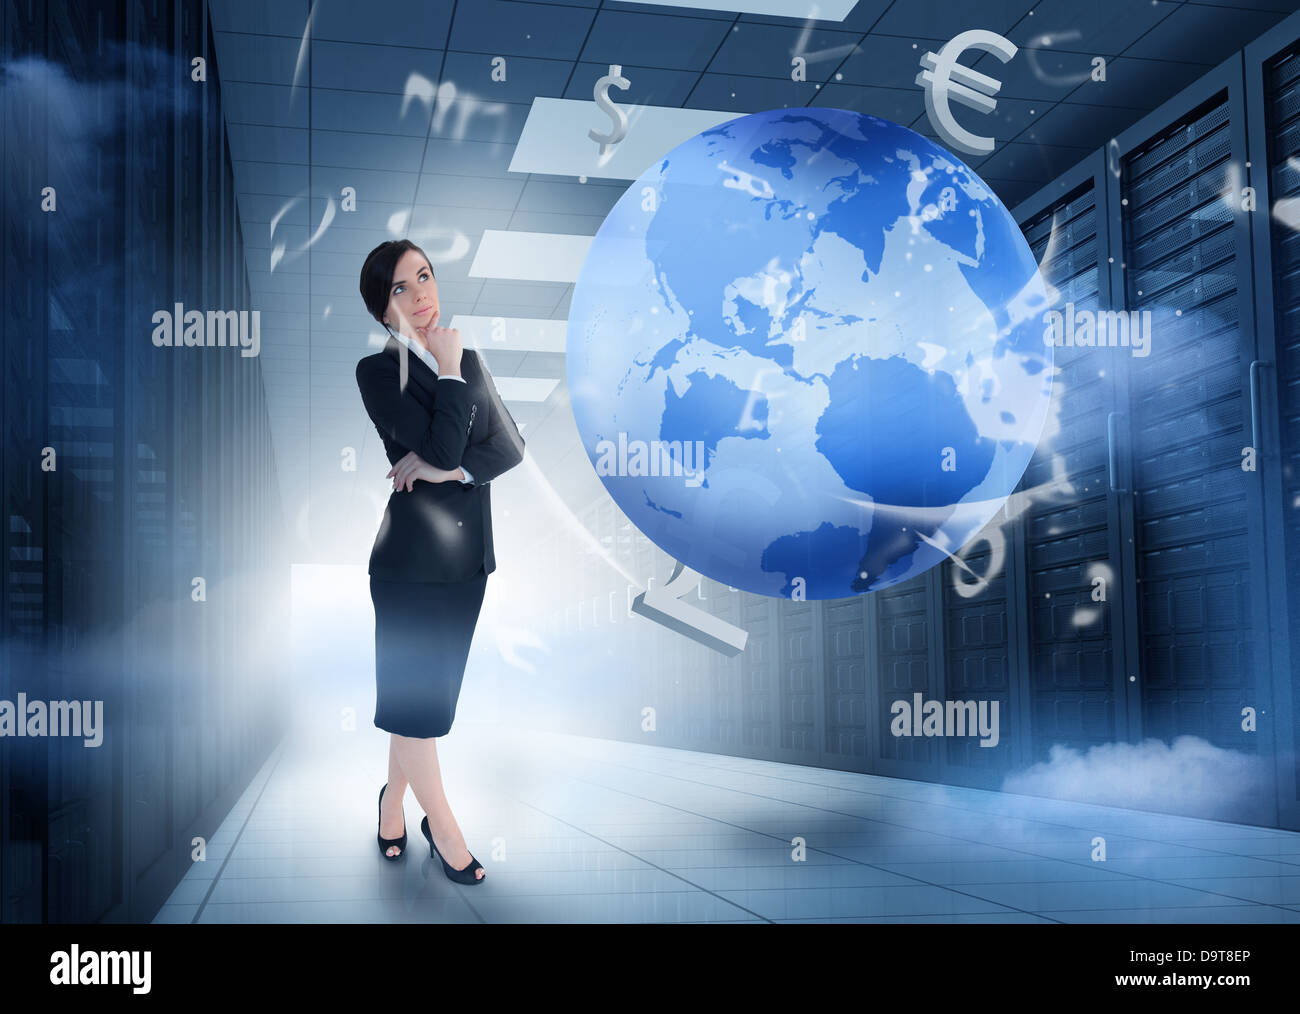 Businesswoman standing in data center with earth and currency graphics Stock Photo